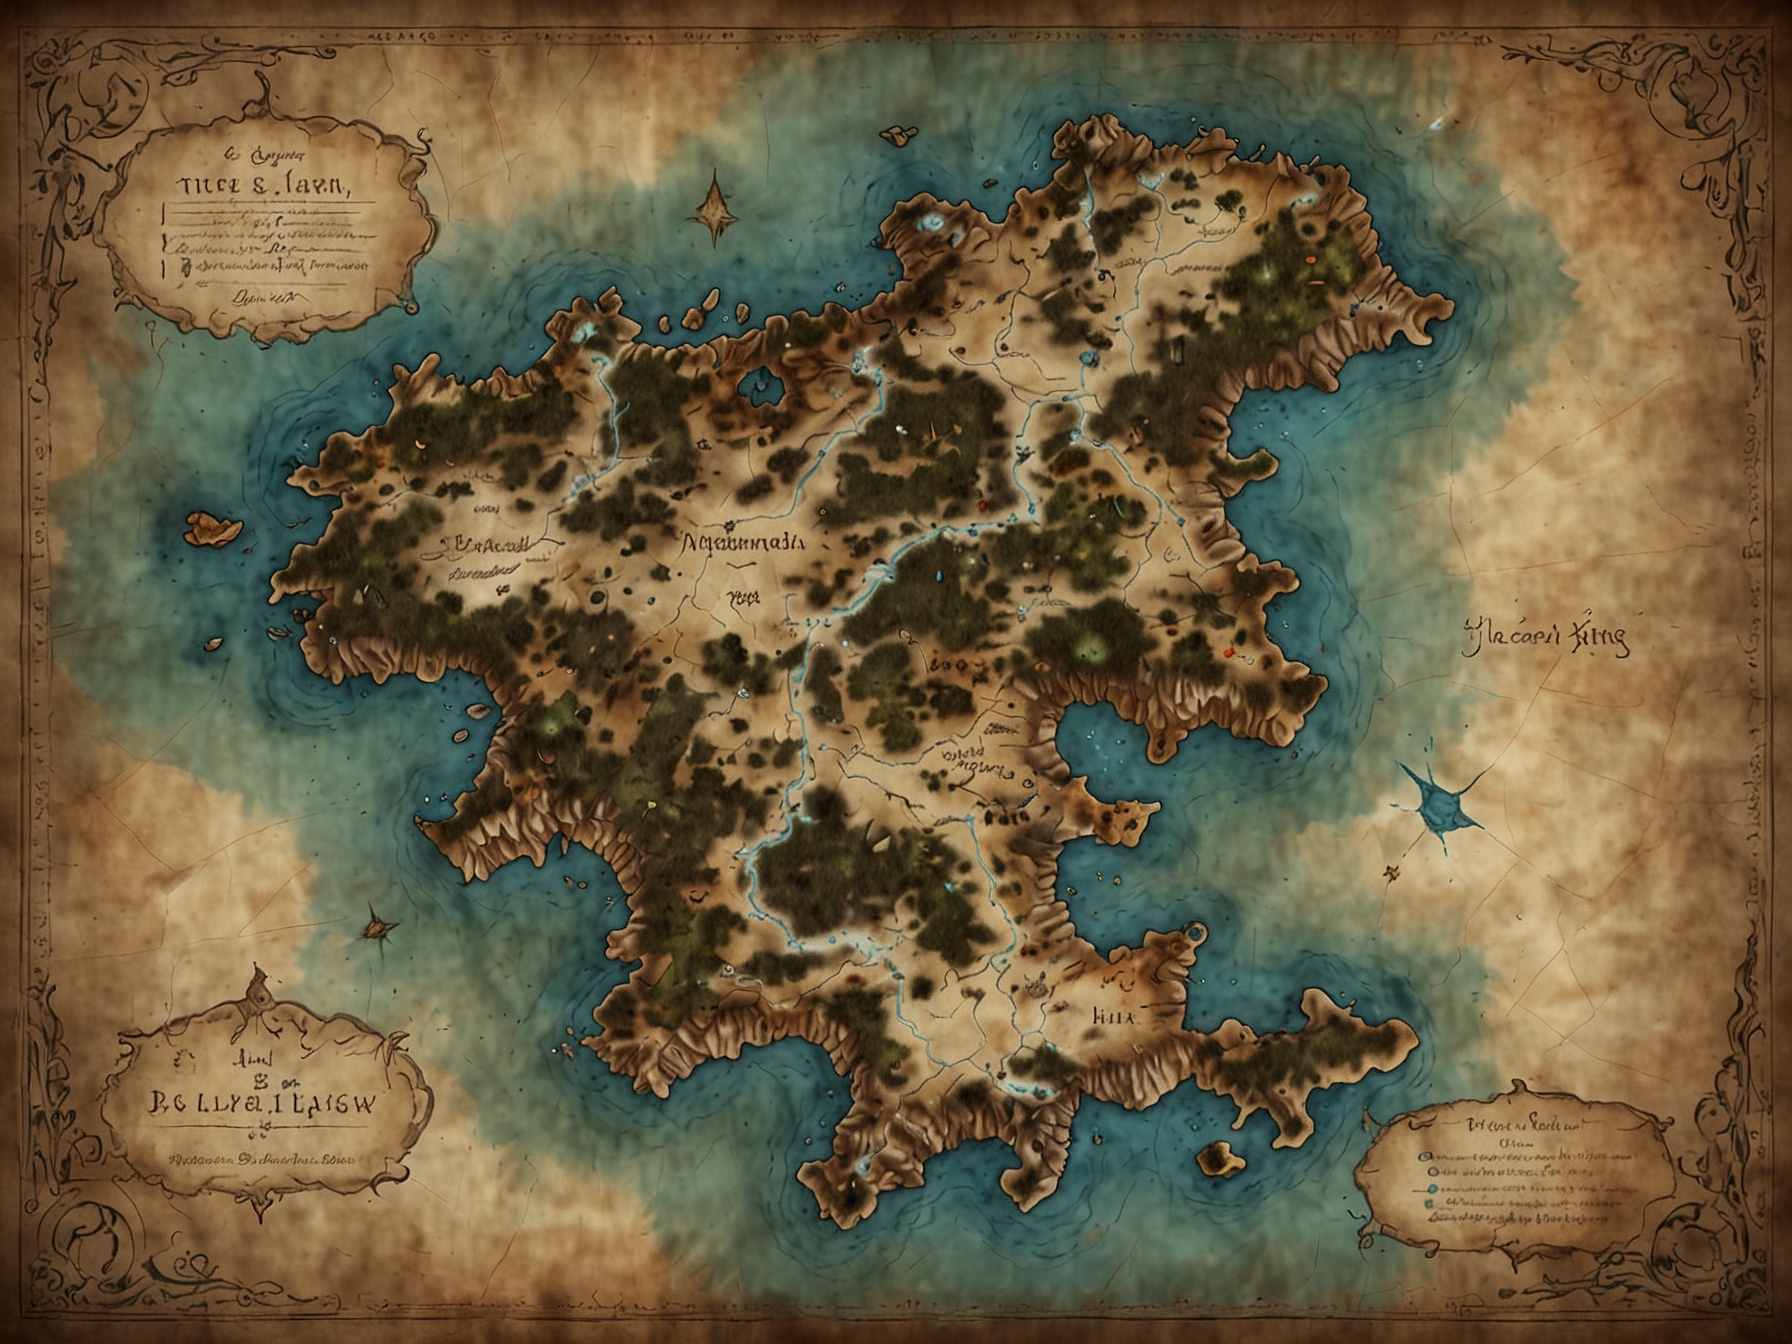 A detailed map of the Lands Between in Elden Ring, emphasizing the vast, interconnected world and deep lore that players uncover through exploration.